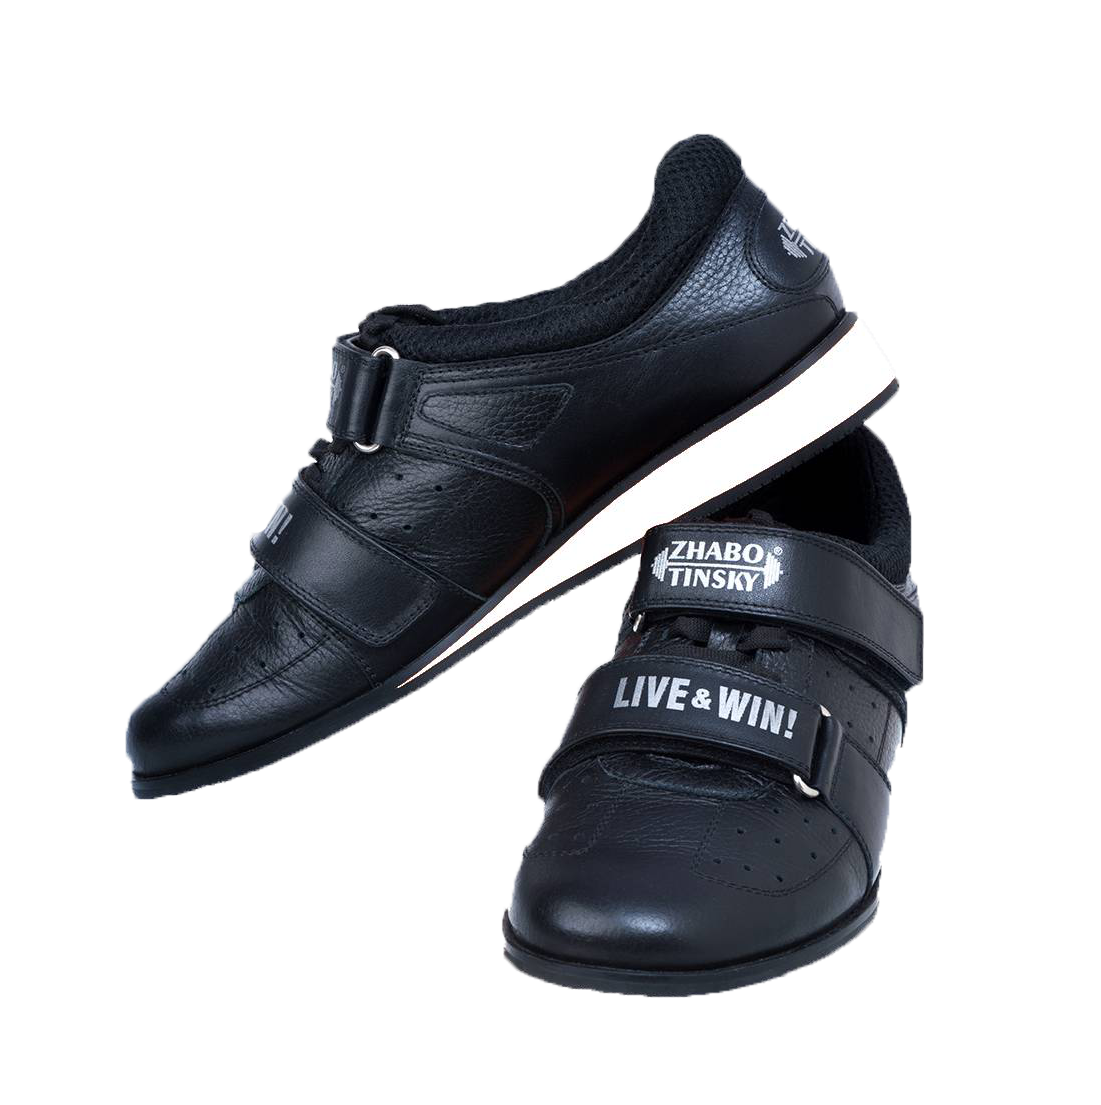 Weightlifting shoes Live&Win , black, 49 size (UKR)